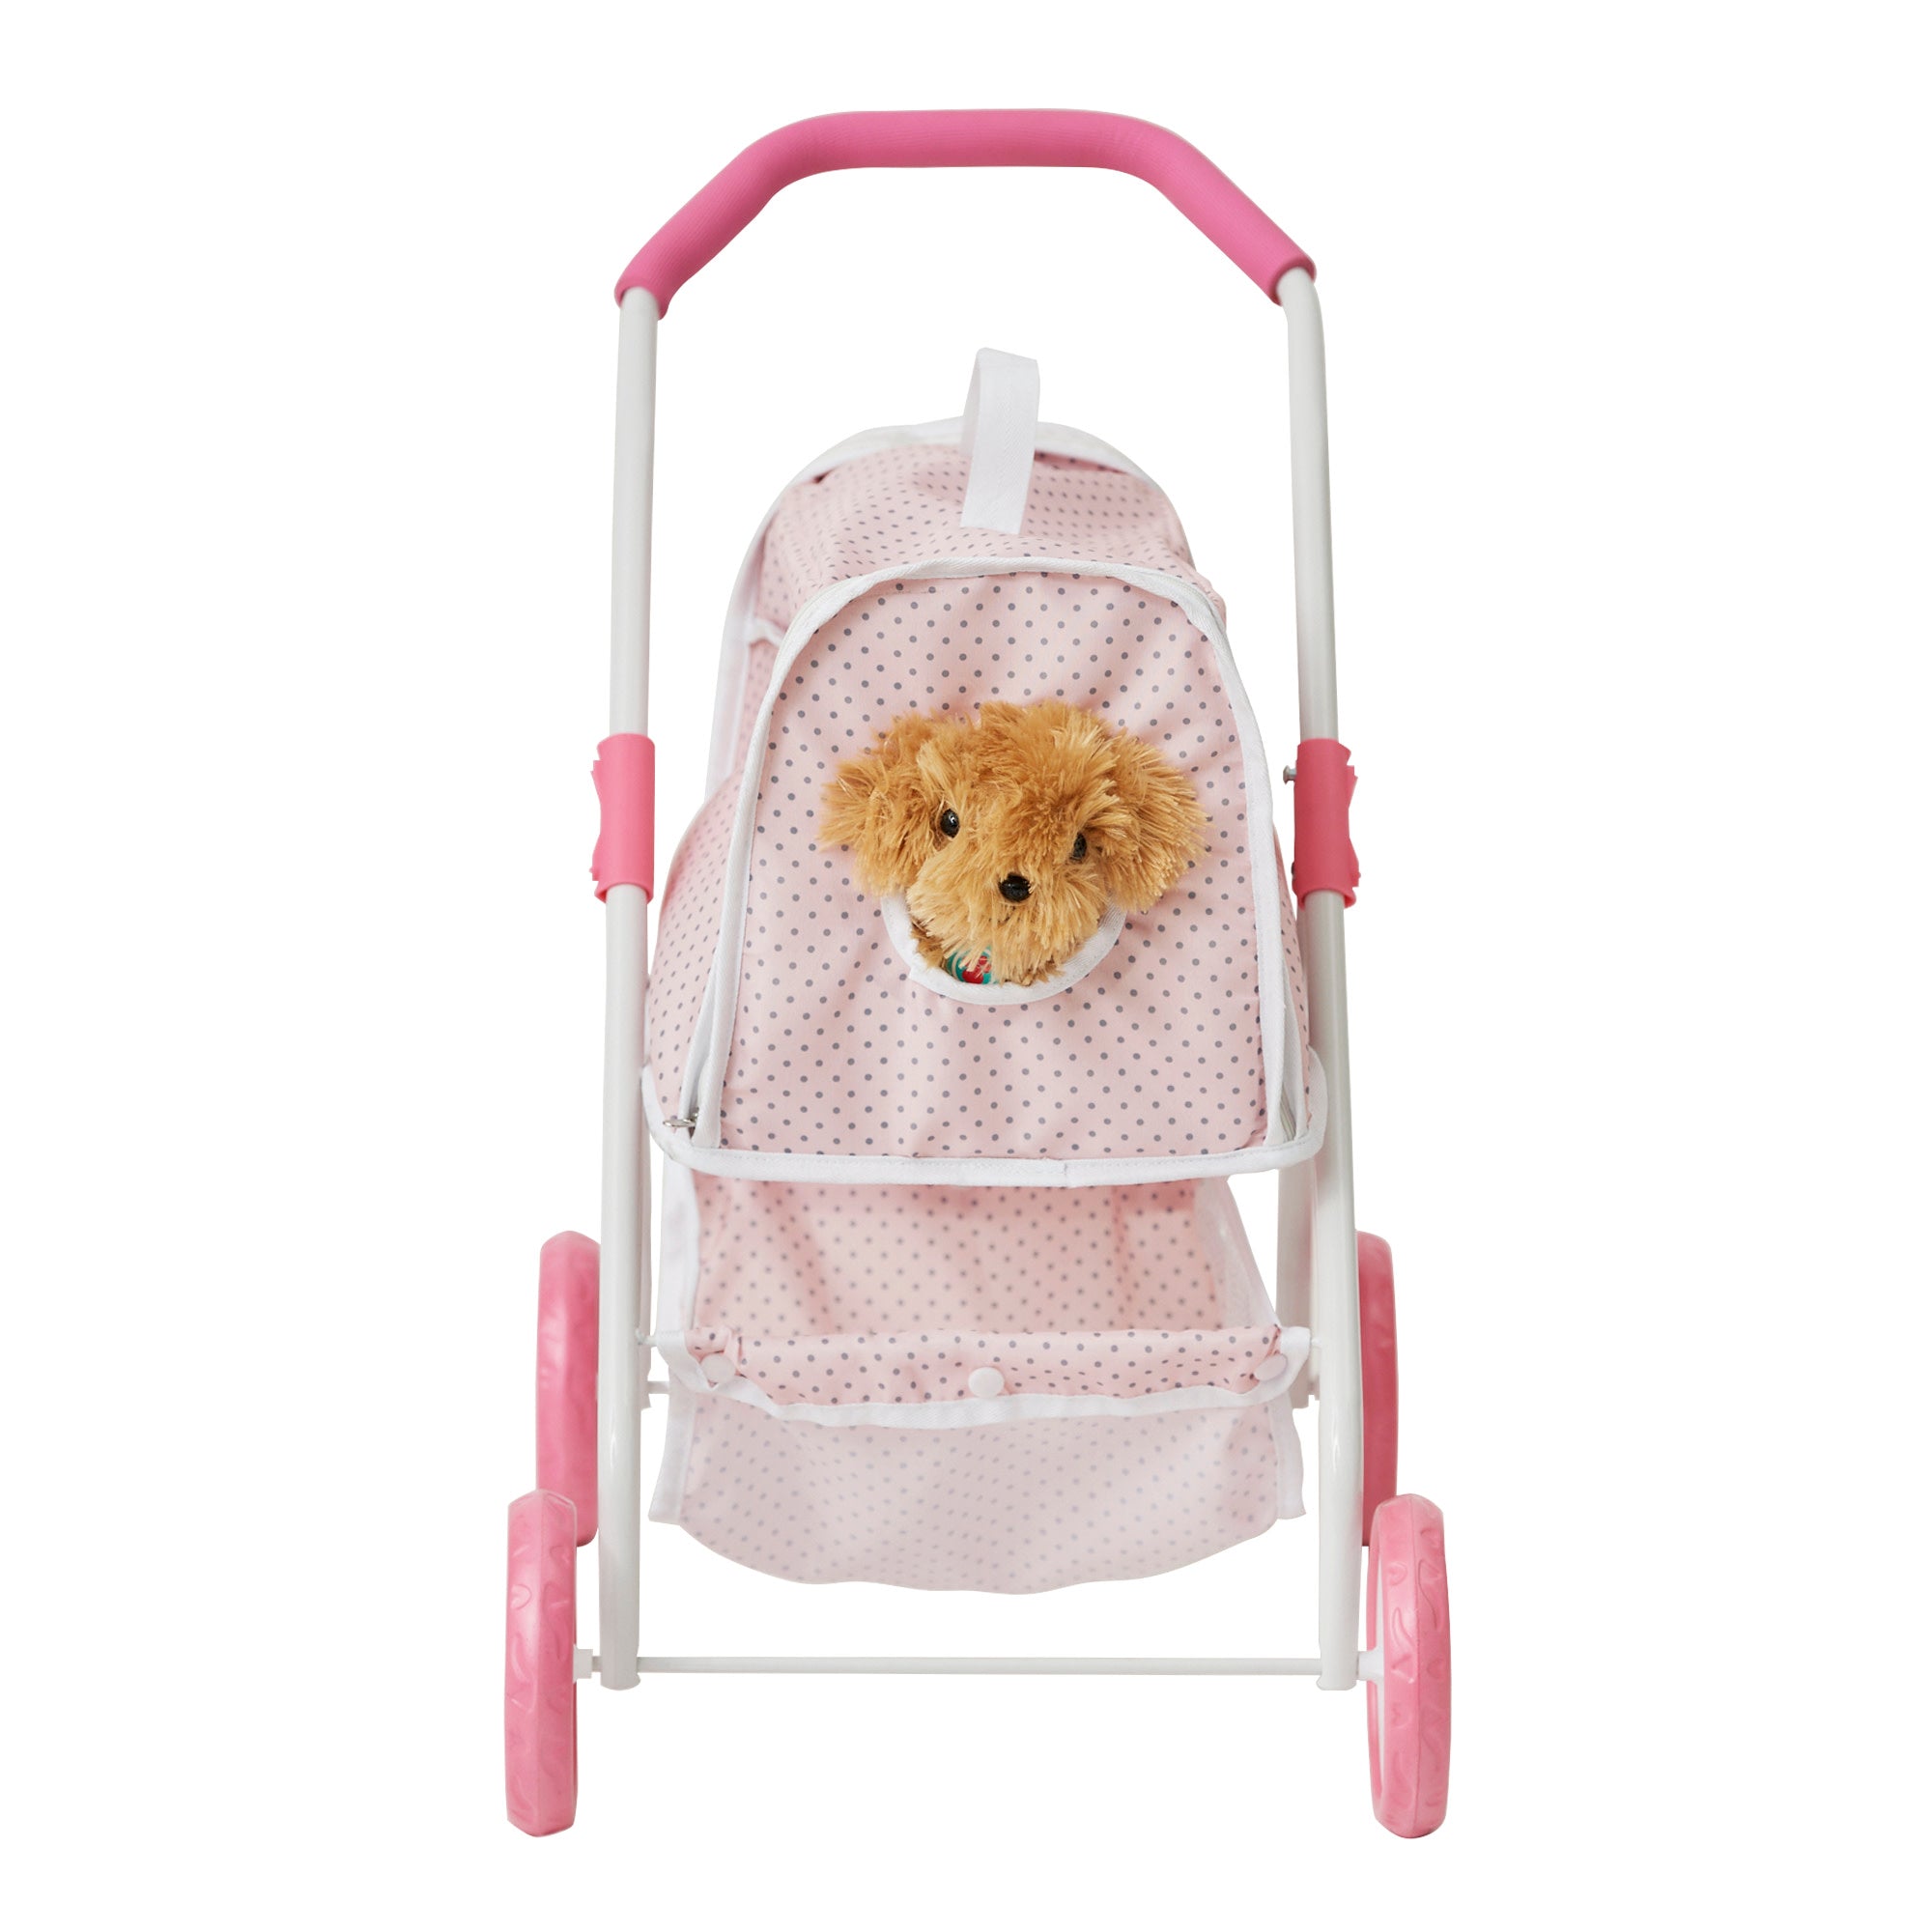 Olivia's Little World - Polka Dots Princess Baby Doll Deluxe Stroller -  Pink & Gray : Target